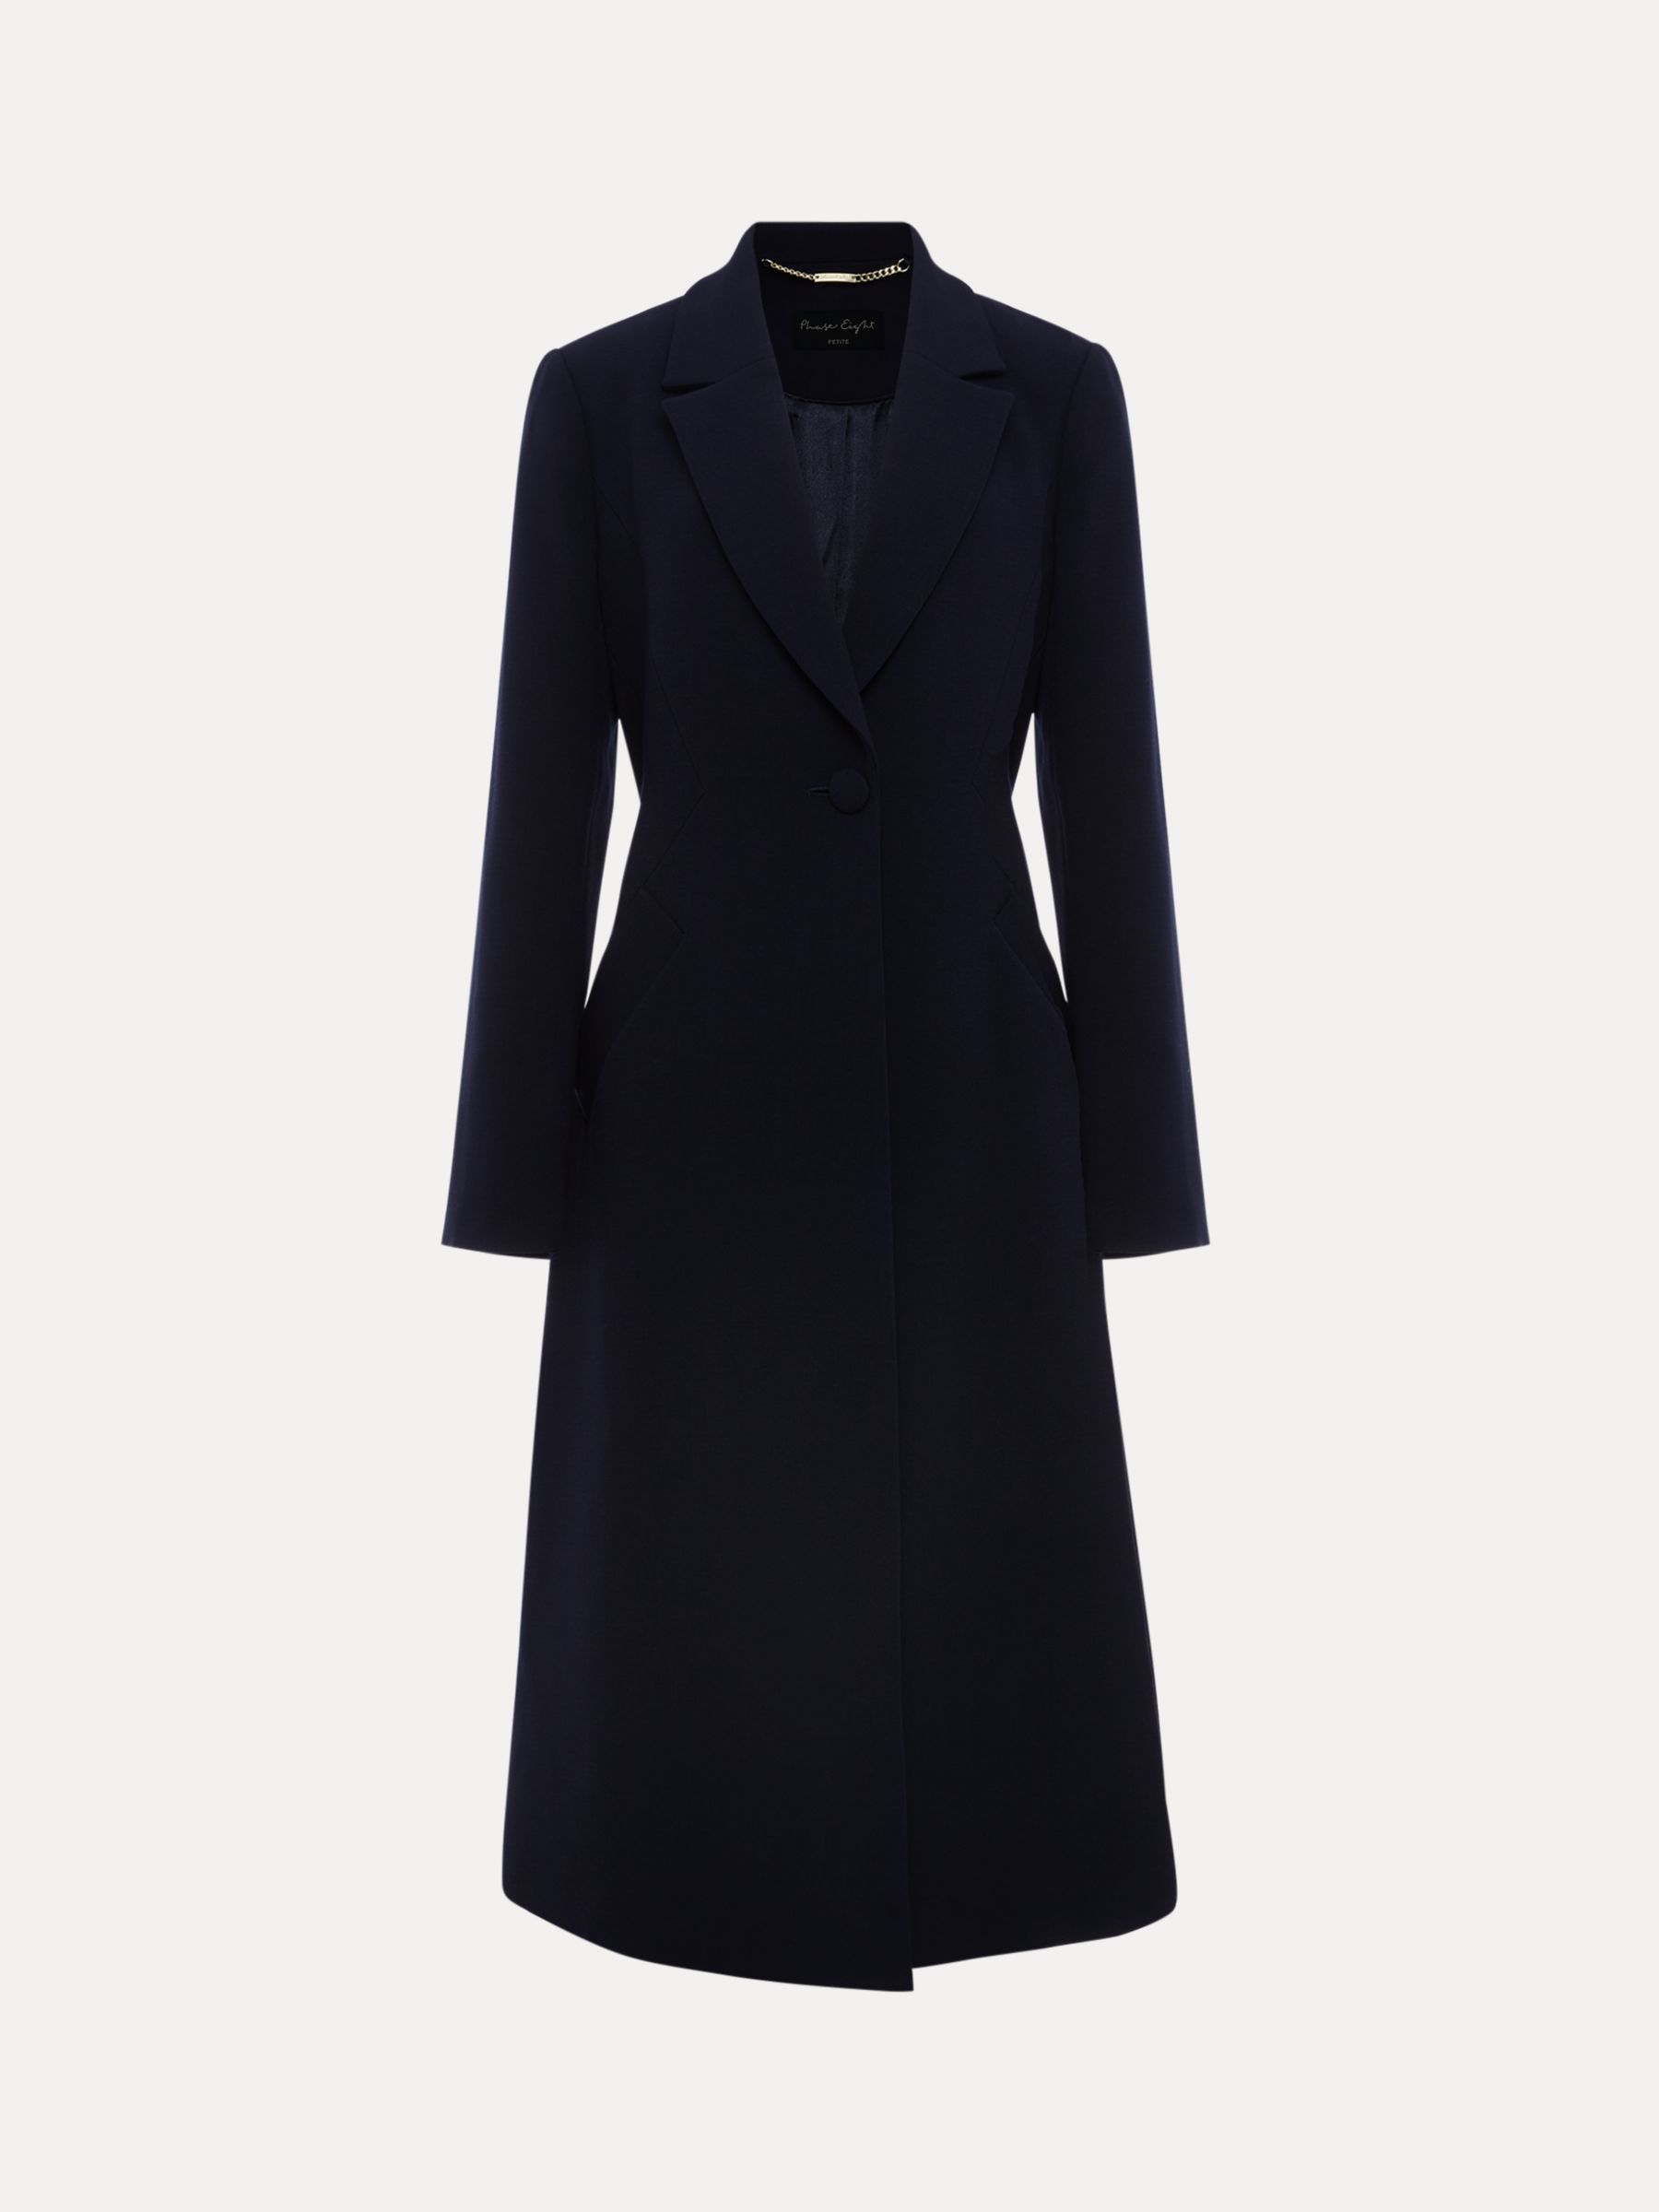 Phase Eight Petite Juliette Crepe Occasion Coat, Navy, 6